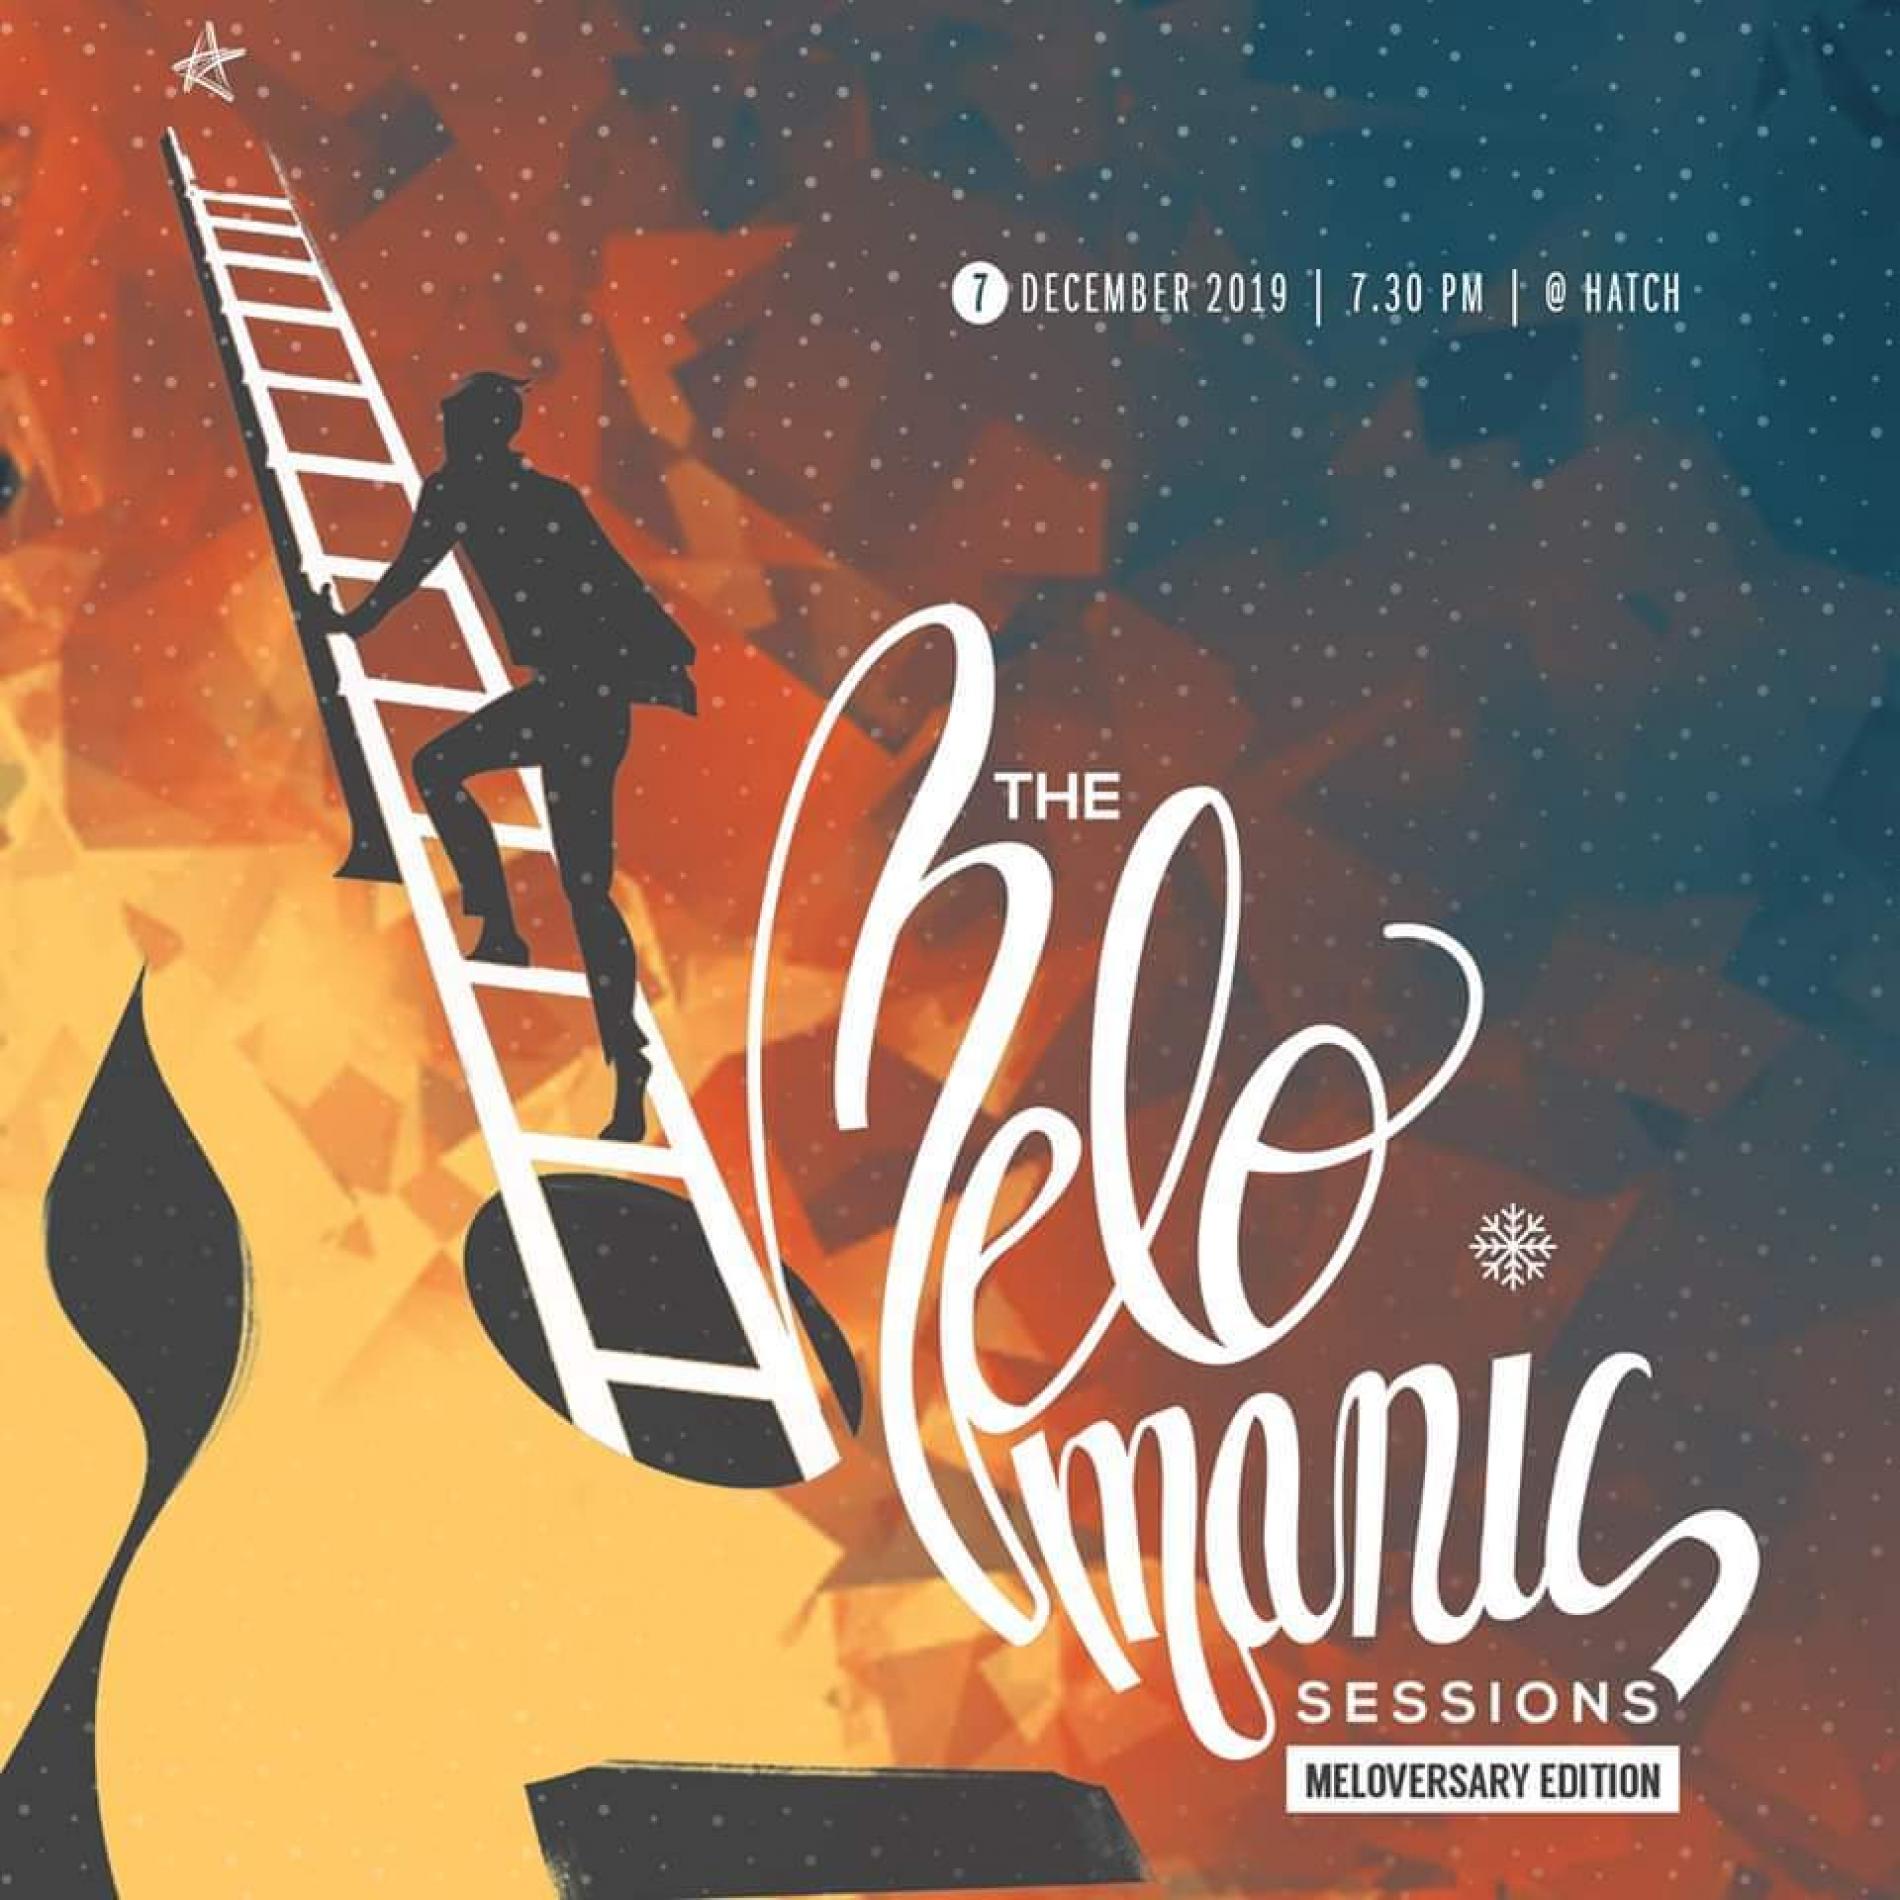 the melomanic sessions